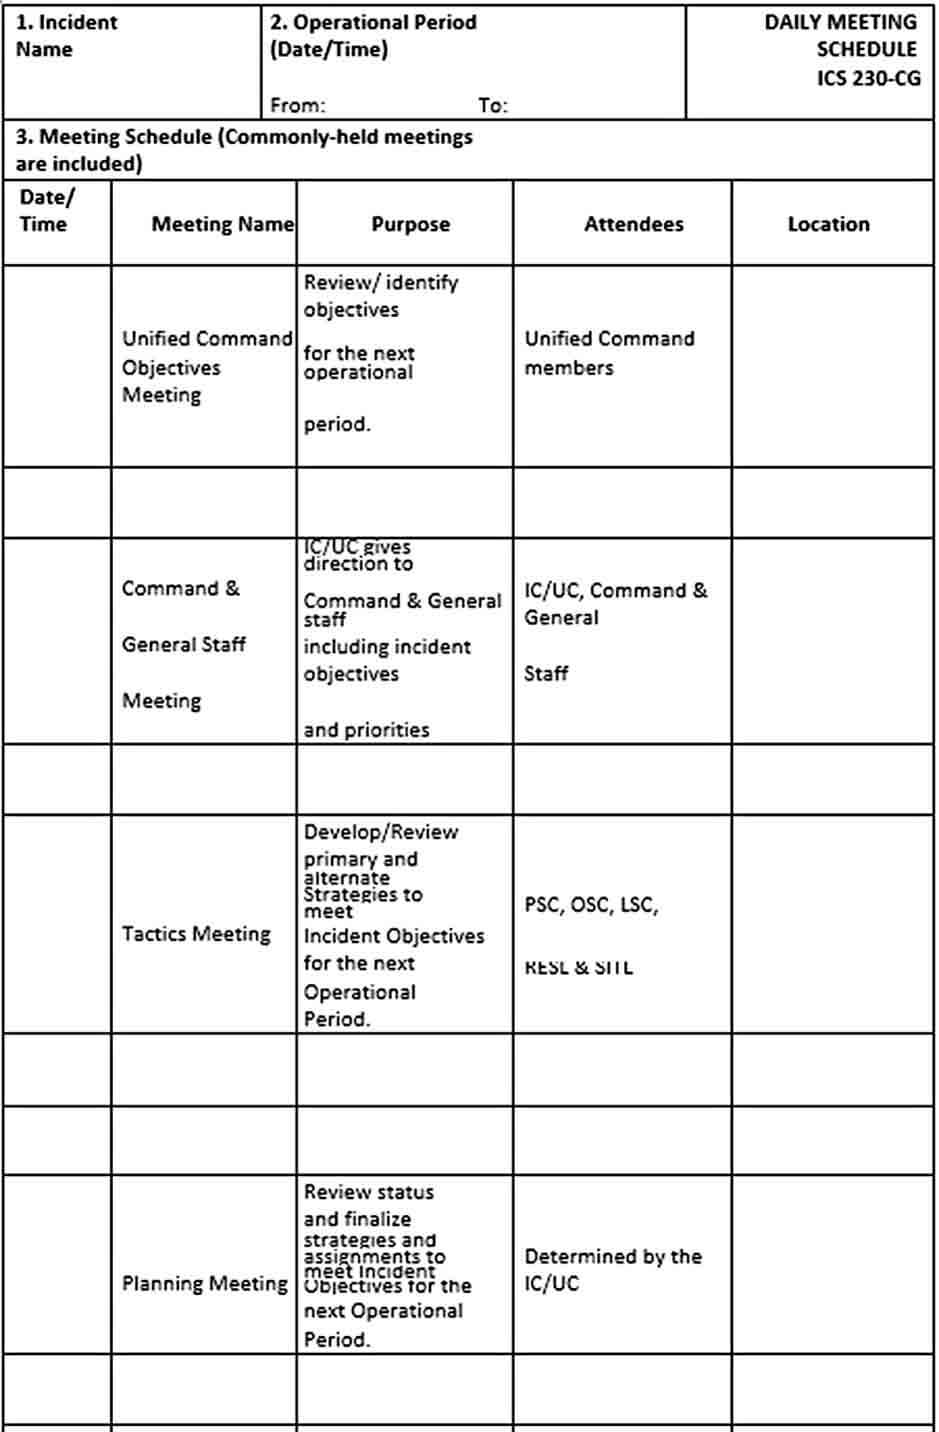 Daily Meeting Schedule Template PDF Format